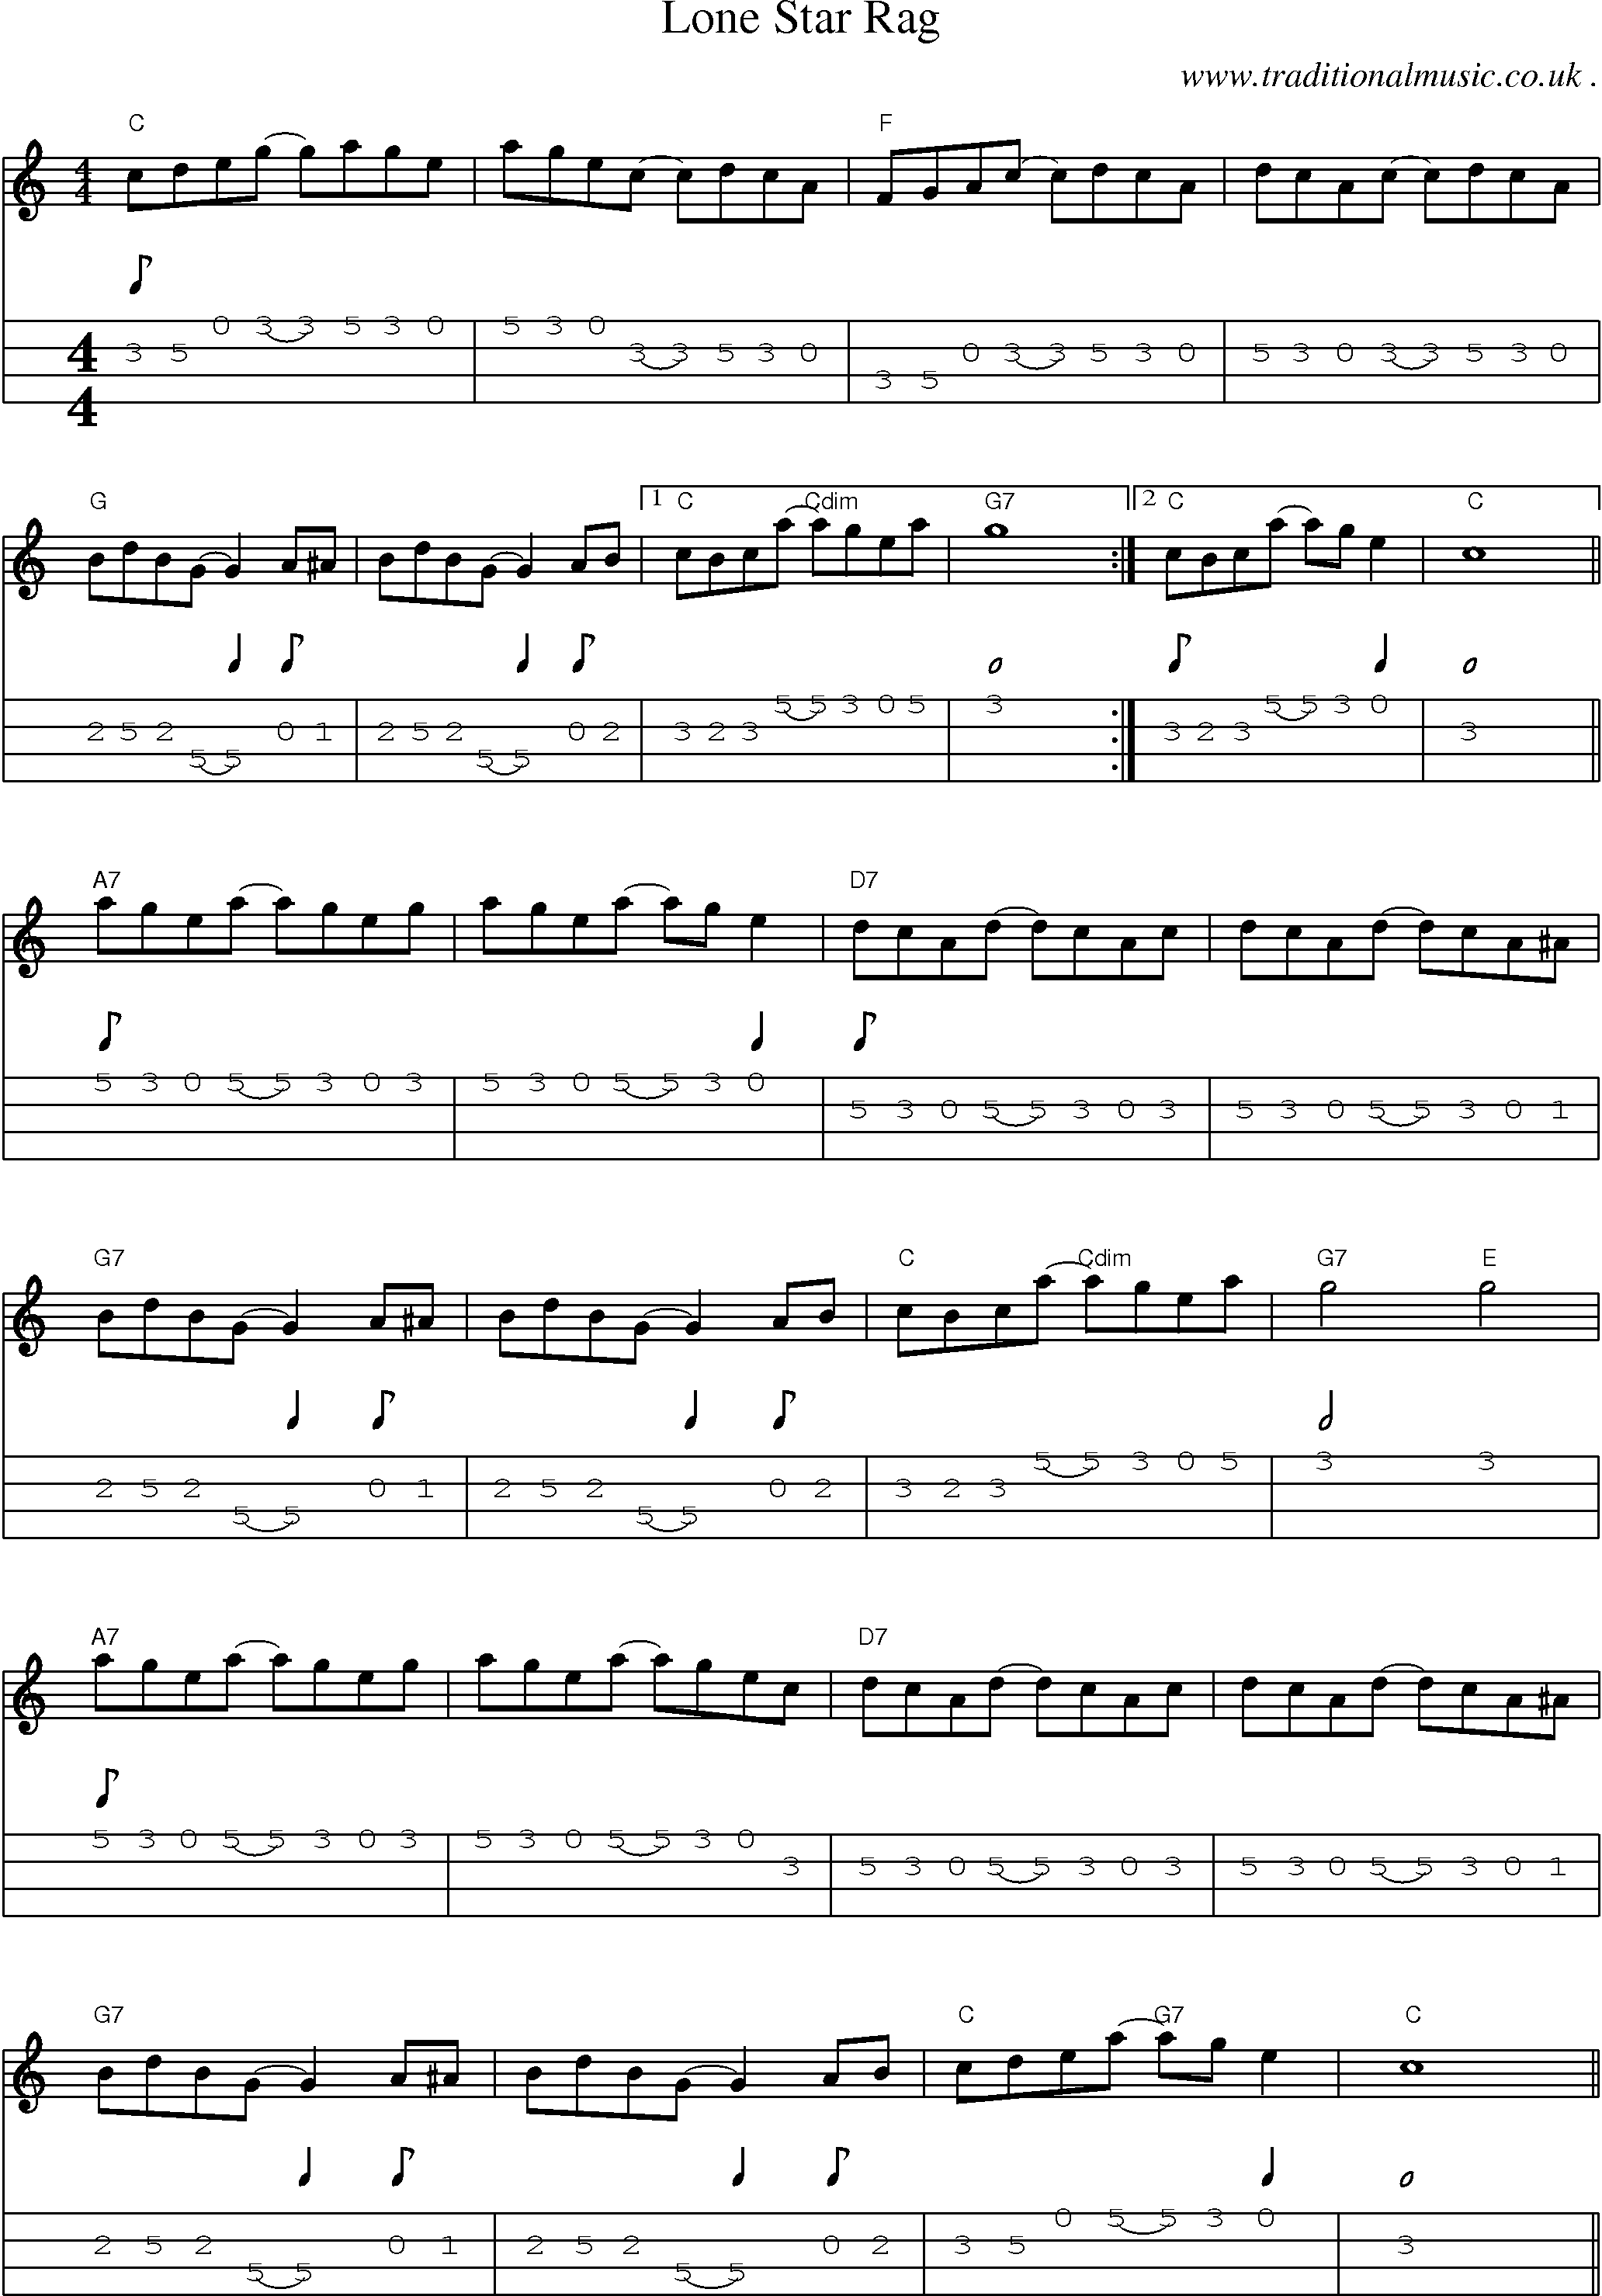 Music Score and Mandolin Tabs for Lone Star Rag